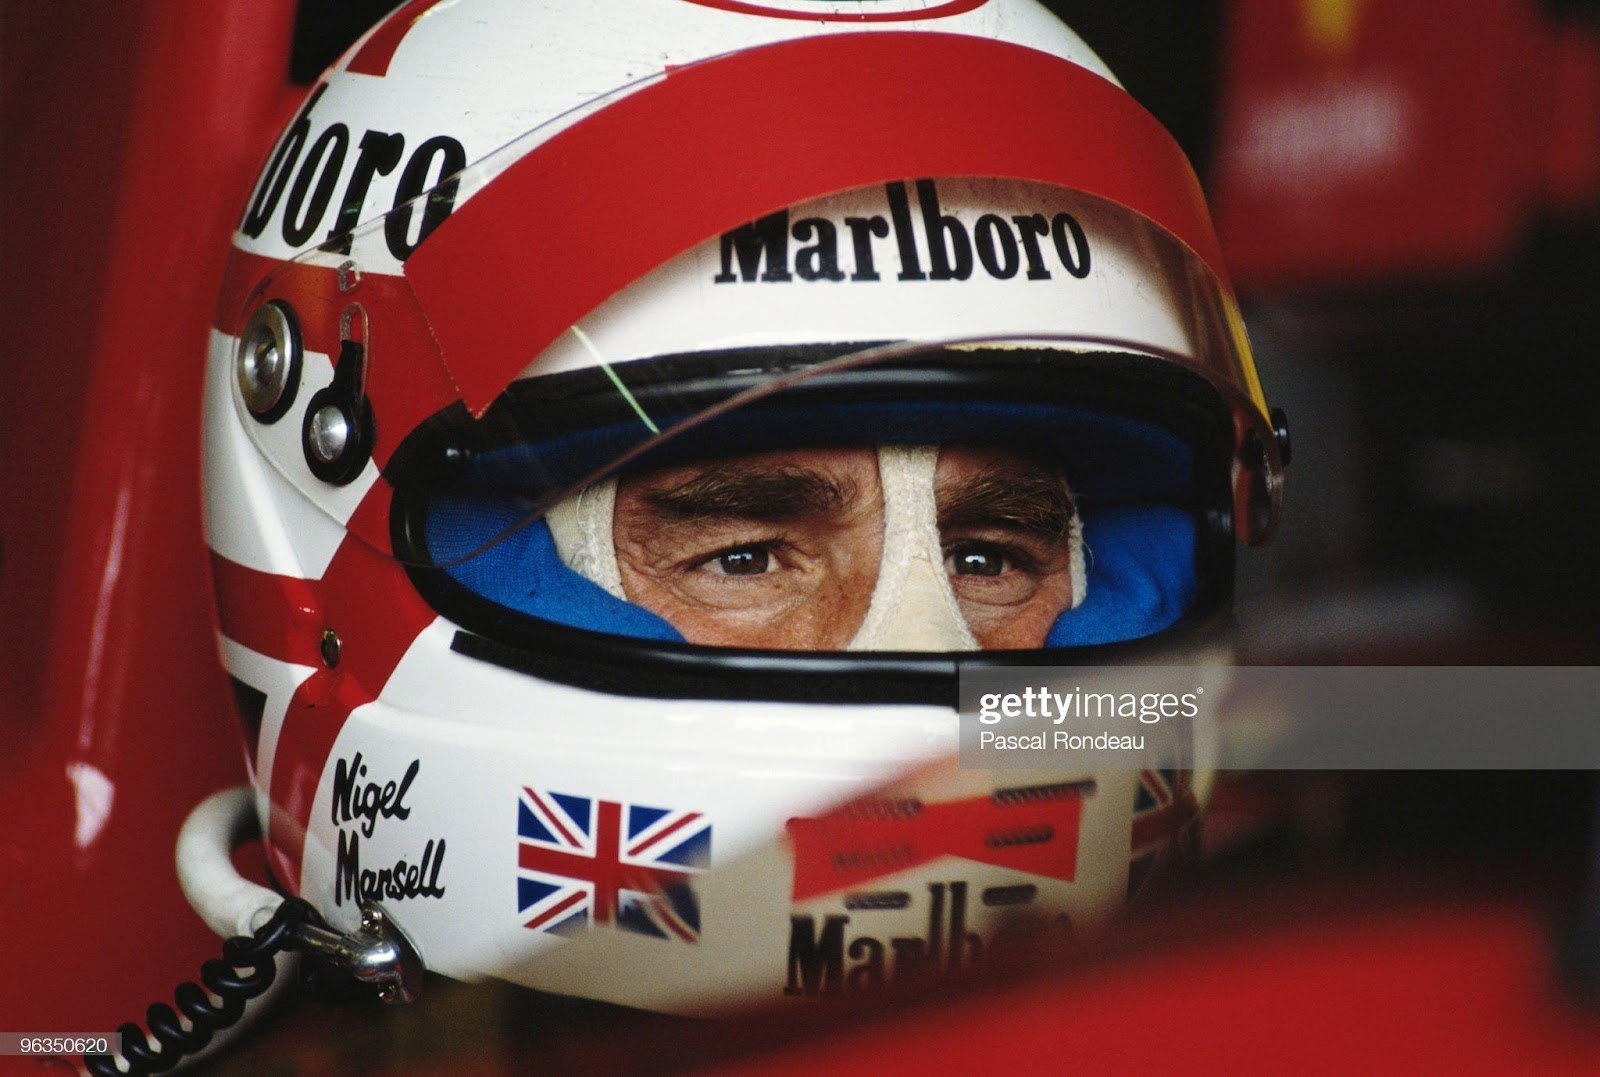 Nigel Mansell, driver of the Ferrari 640, during practice for the Japanese Grand Prix on 21st October 1989 at the Suzuka Circuit in Suzuka City, Japan.